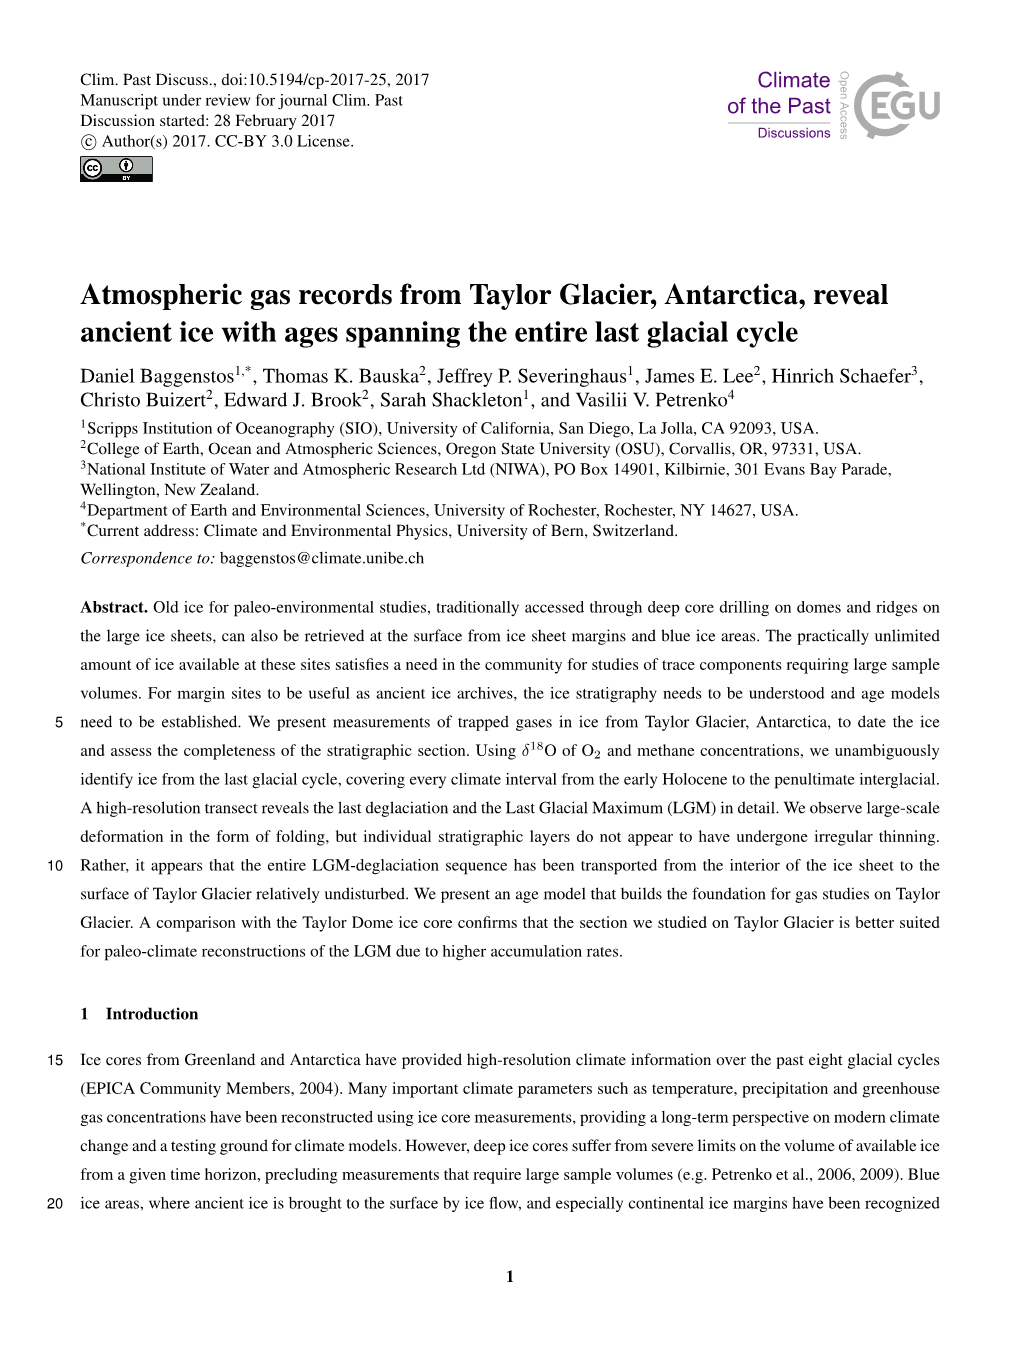 Atmospheric Gas Records from Taylor Glacier, Antarctica, Reveal Ancient Ice with Ages Spanning the Entire Last Glacial Cycle Daniel Baggenstos1,*, Thomas K